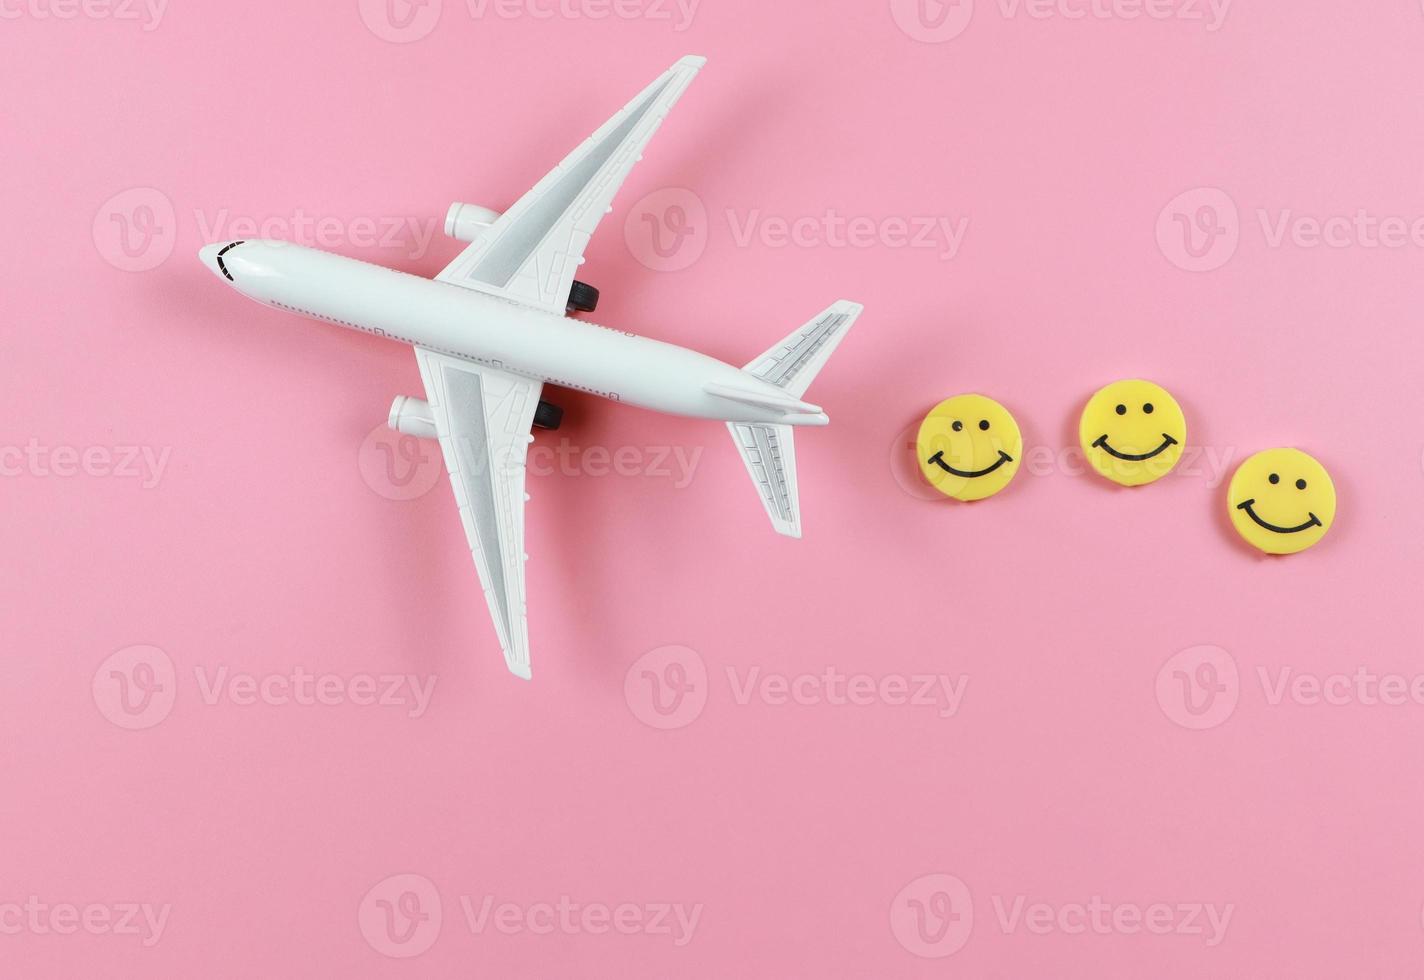 flat lay of airplane model with three yellow circle smiling faces  on pink  background. Happy or fun trip concept. photo